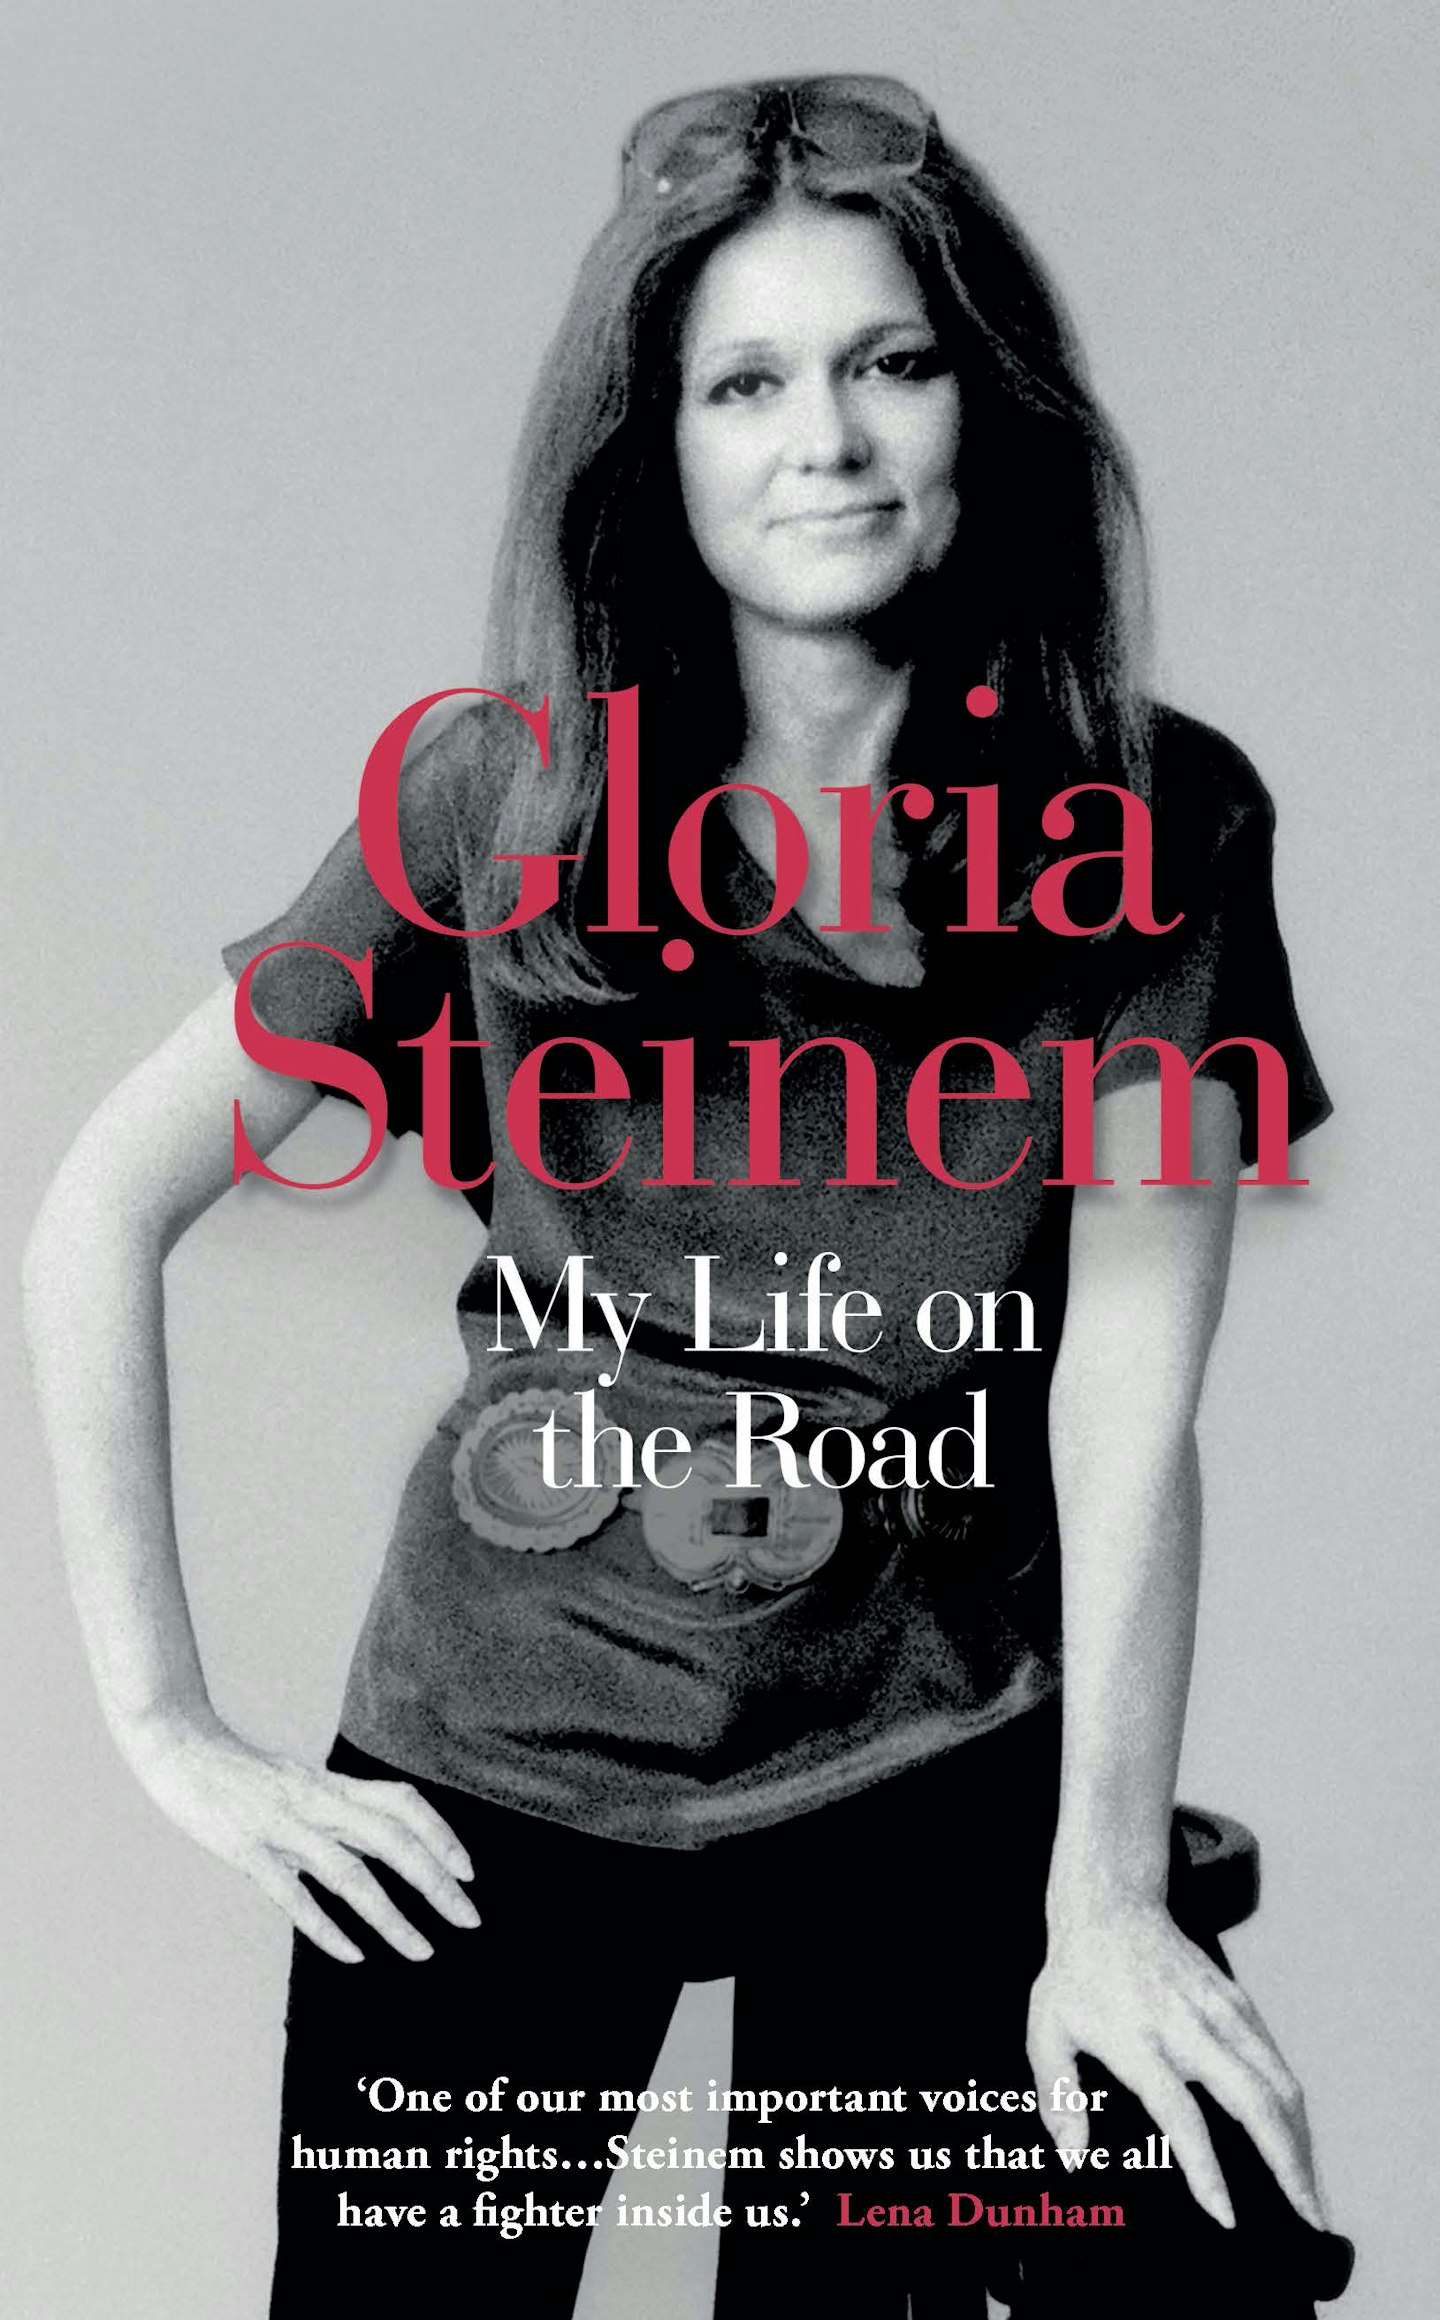 My Life on the Road - Gloria Steinem (Oneworld publications)